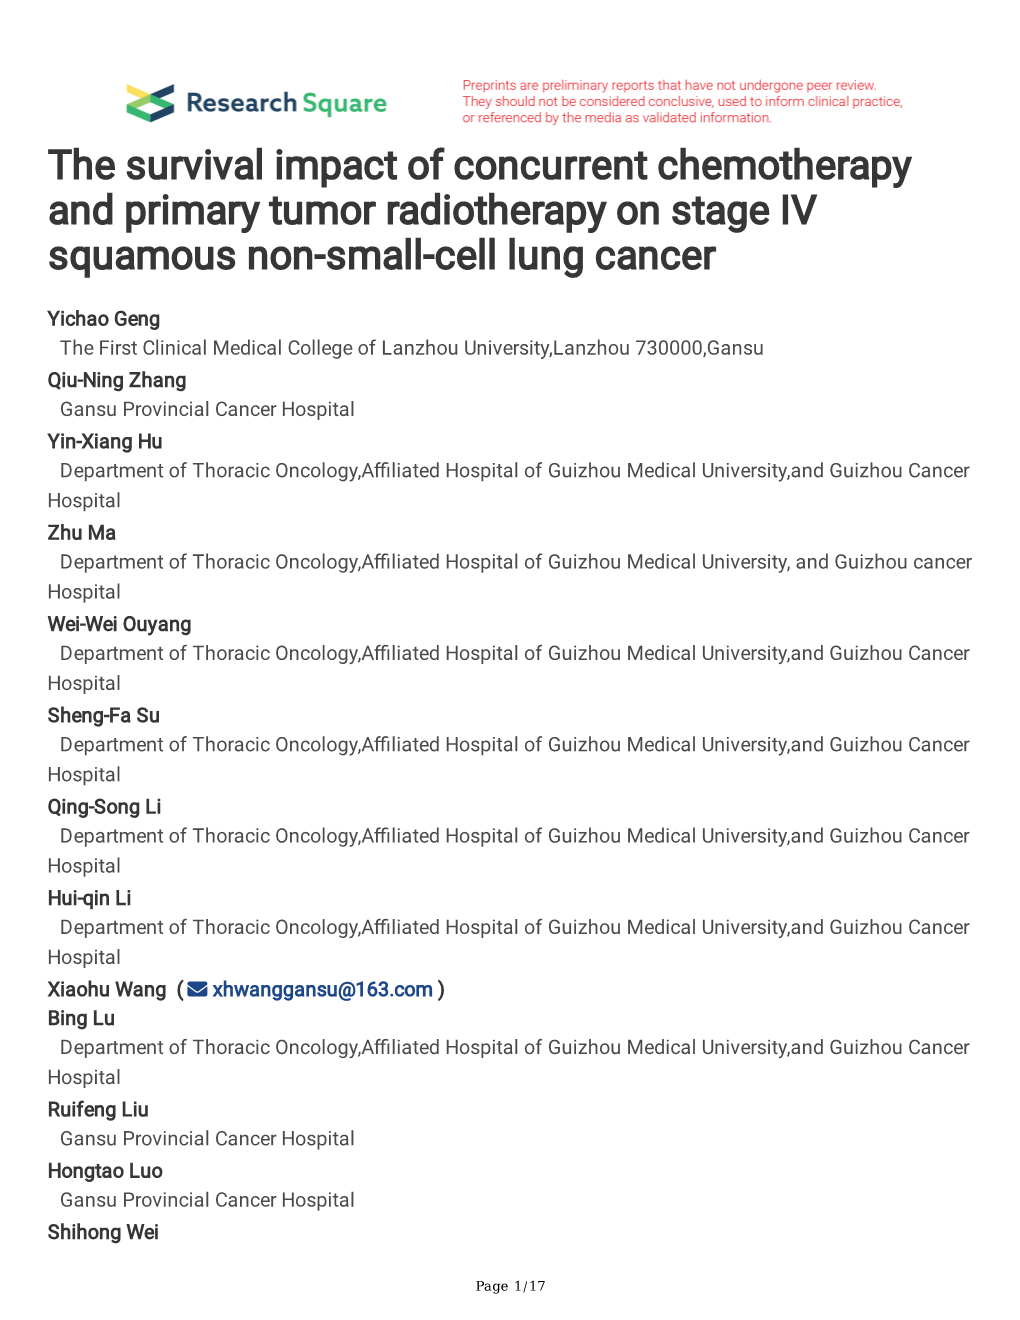 The Survival Impact of Concurrent Chemotherapy and Primary Tumor Radiotherapy on Stage IV Squamous Non-Small-Cell Lung Cancer